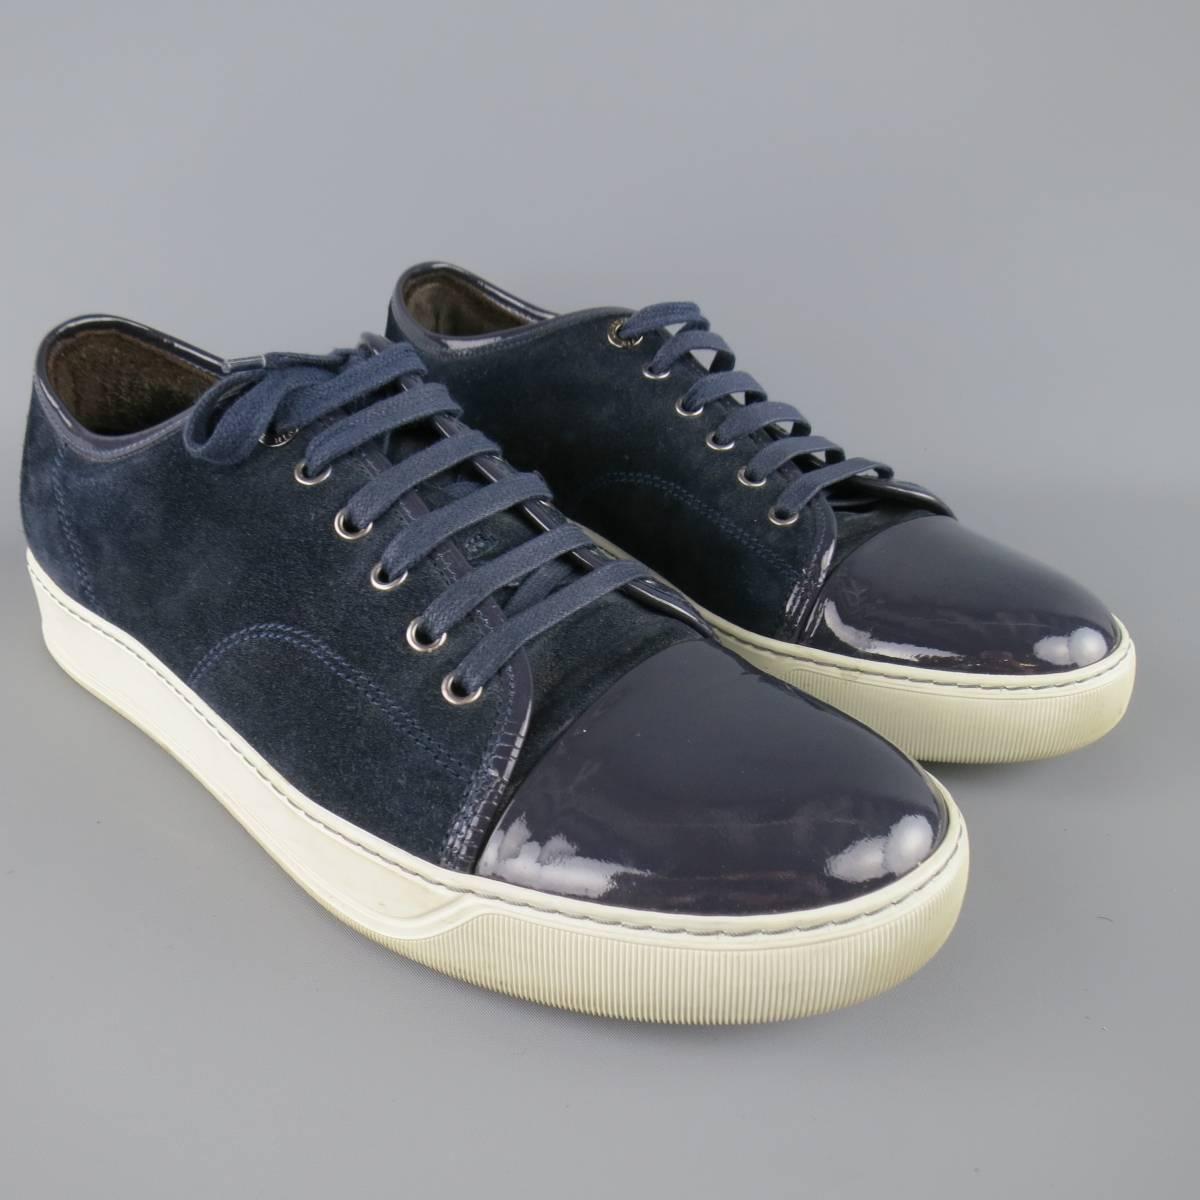 Classic LANVIN sneakers in a navy blue suede featuring a patent leather cap toe and thick white sole. Wear on sole. Made in Portugal.
 
Good Pre-Owned Condition.
Marked: UK 9
 
Outsole: 12 x 4.25 in.